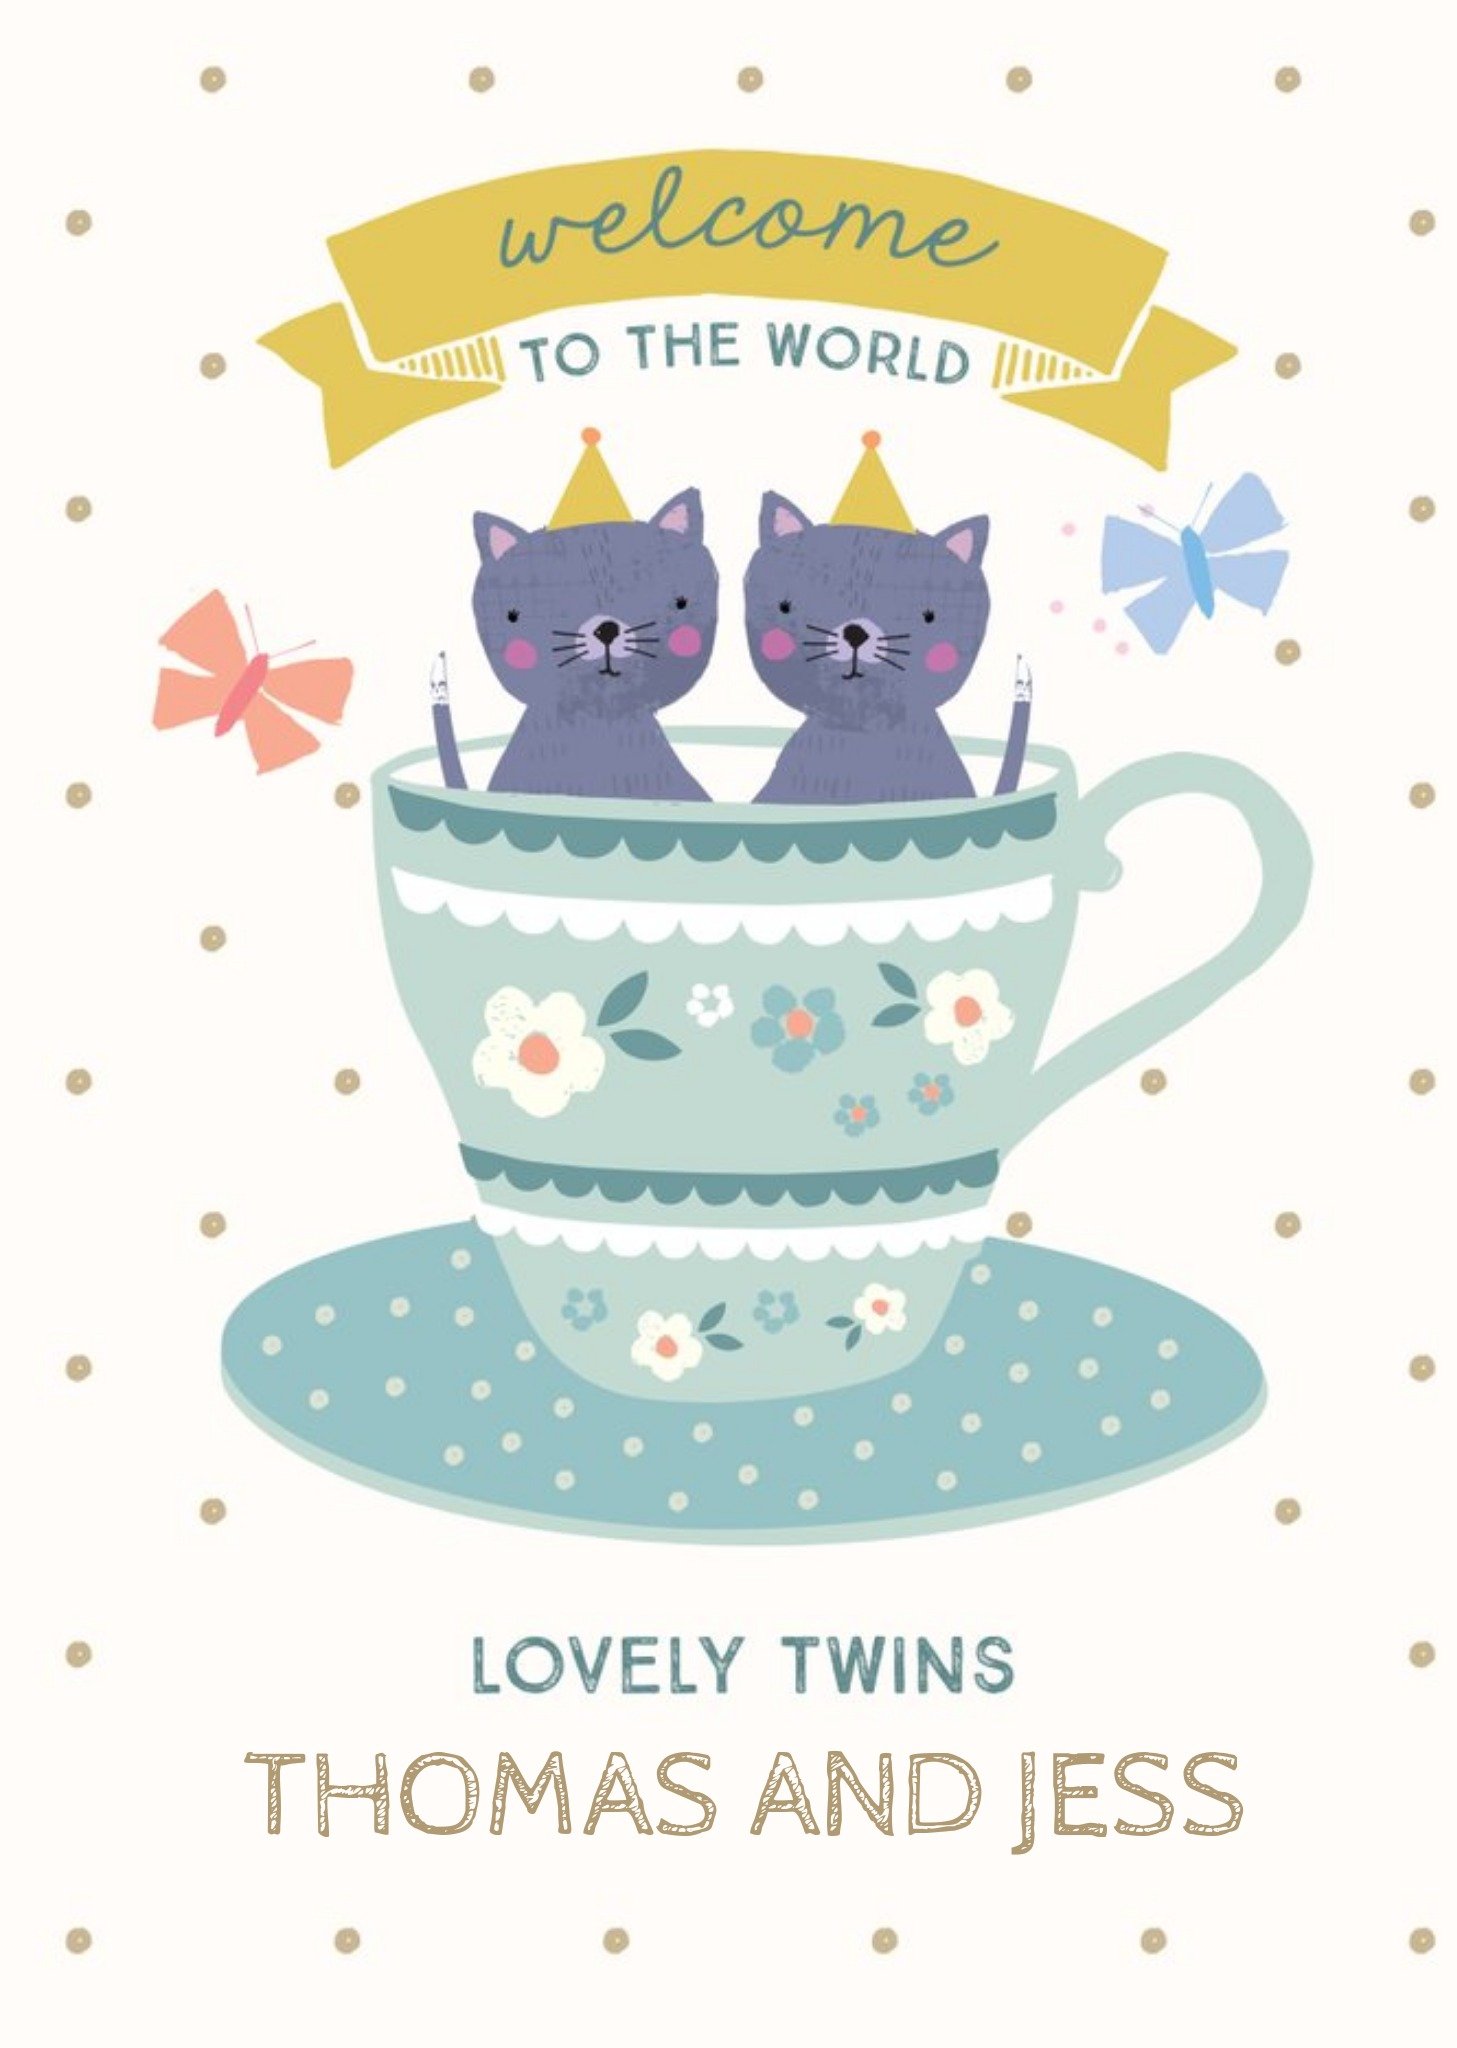 Moonpig Natalie Alex Designs Illustrated Twin Cats Welcome To The World Card, Large